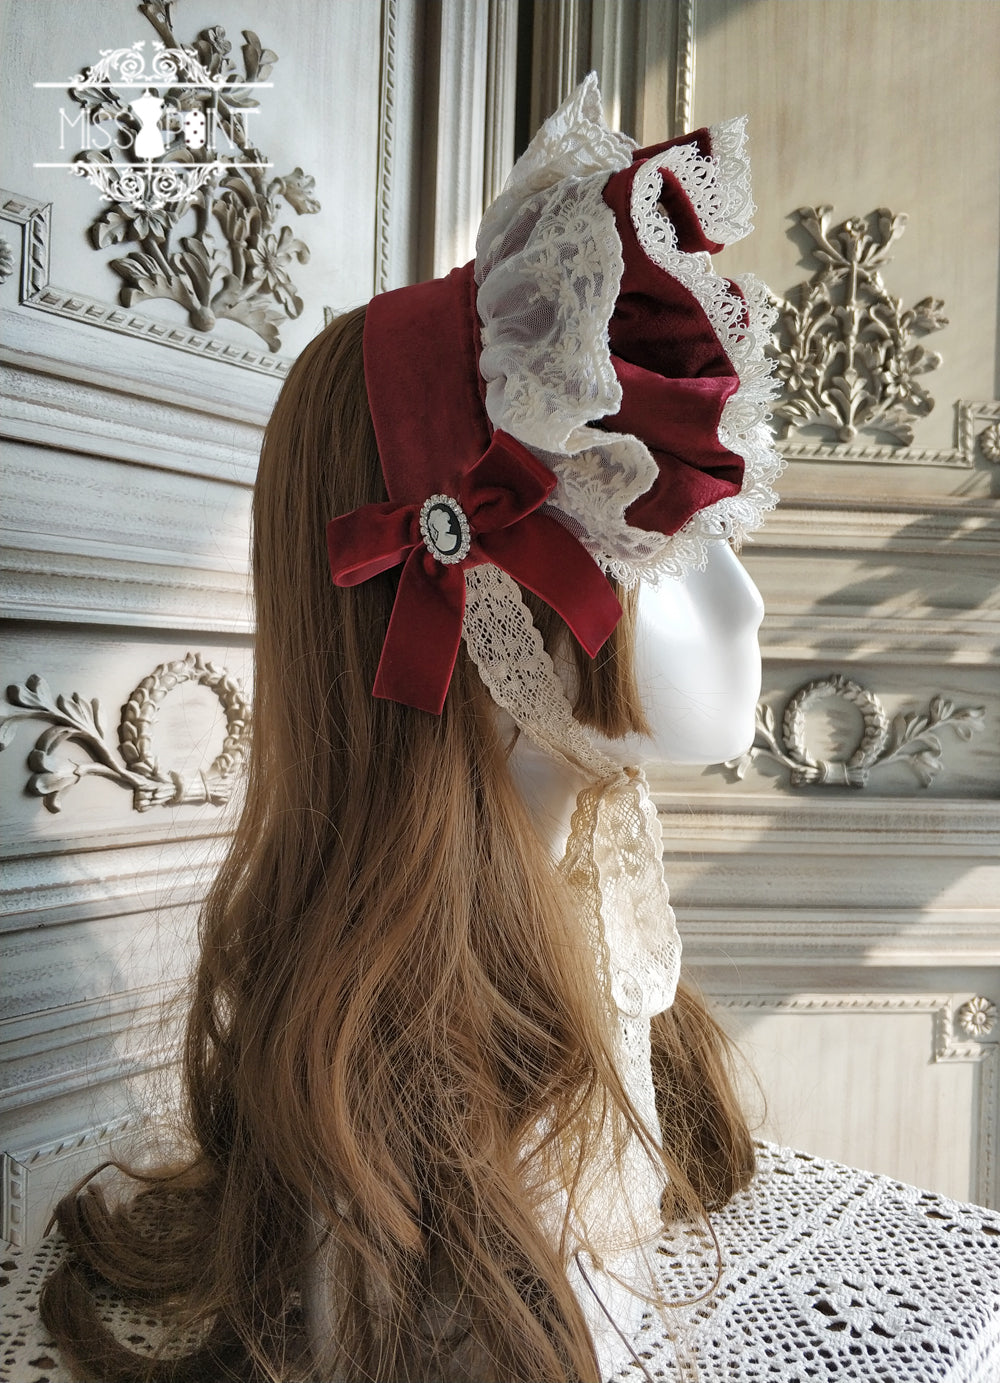 [Simultaneous purchase only] Portrait of a lady Ribbon, bonnet and other accessories